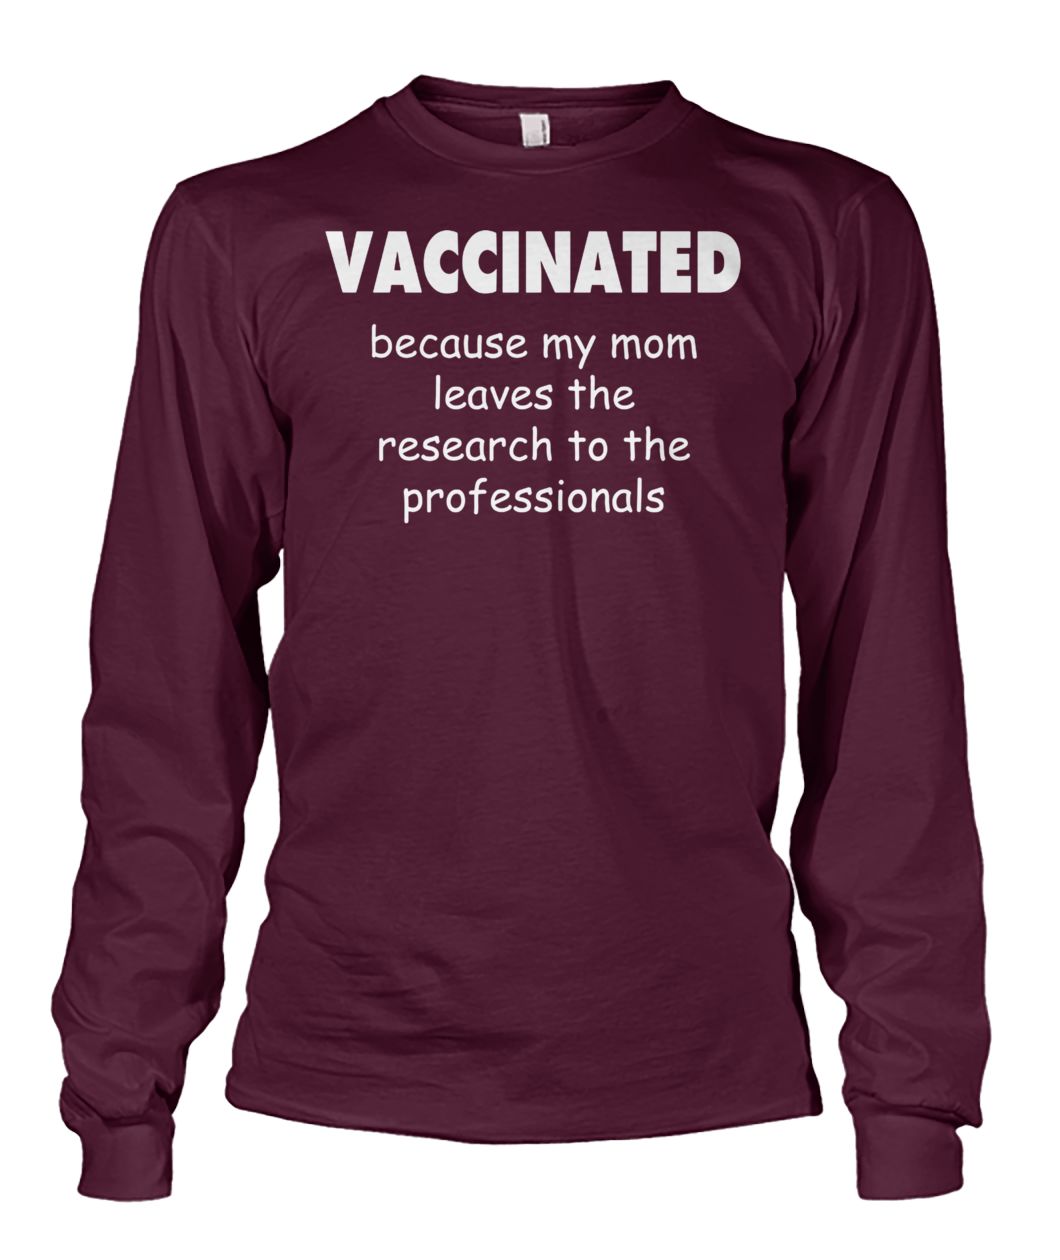 Vaccinated because my mom leaves the research to the professionals unisex long sleeve